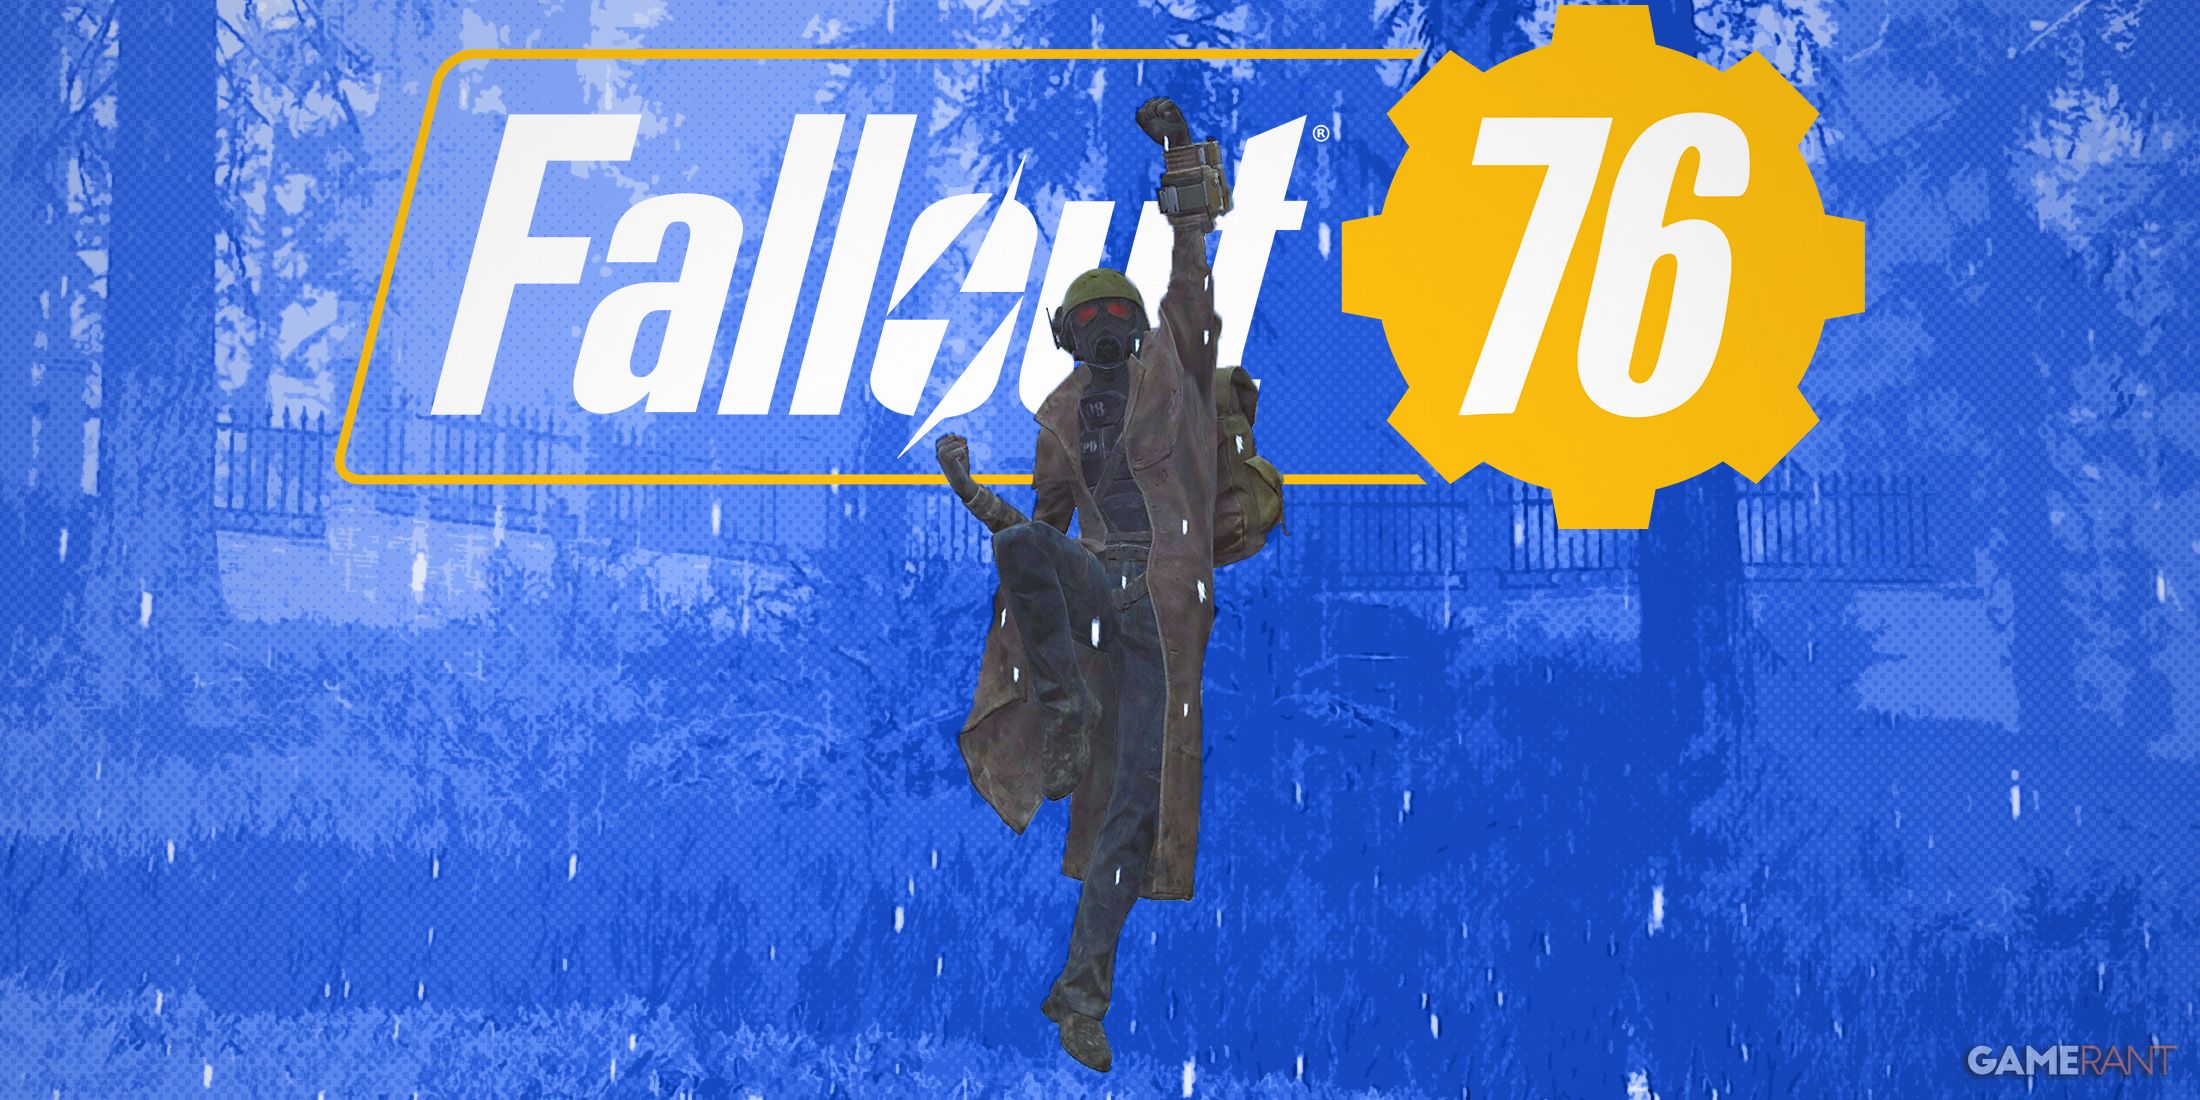 Fallout 76 character in Fallout 1st New Vegas Ranger uniform jumping from joy in front of game logo blue background Whitespring rain edit